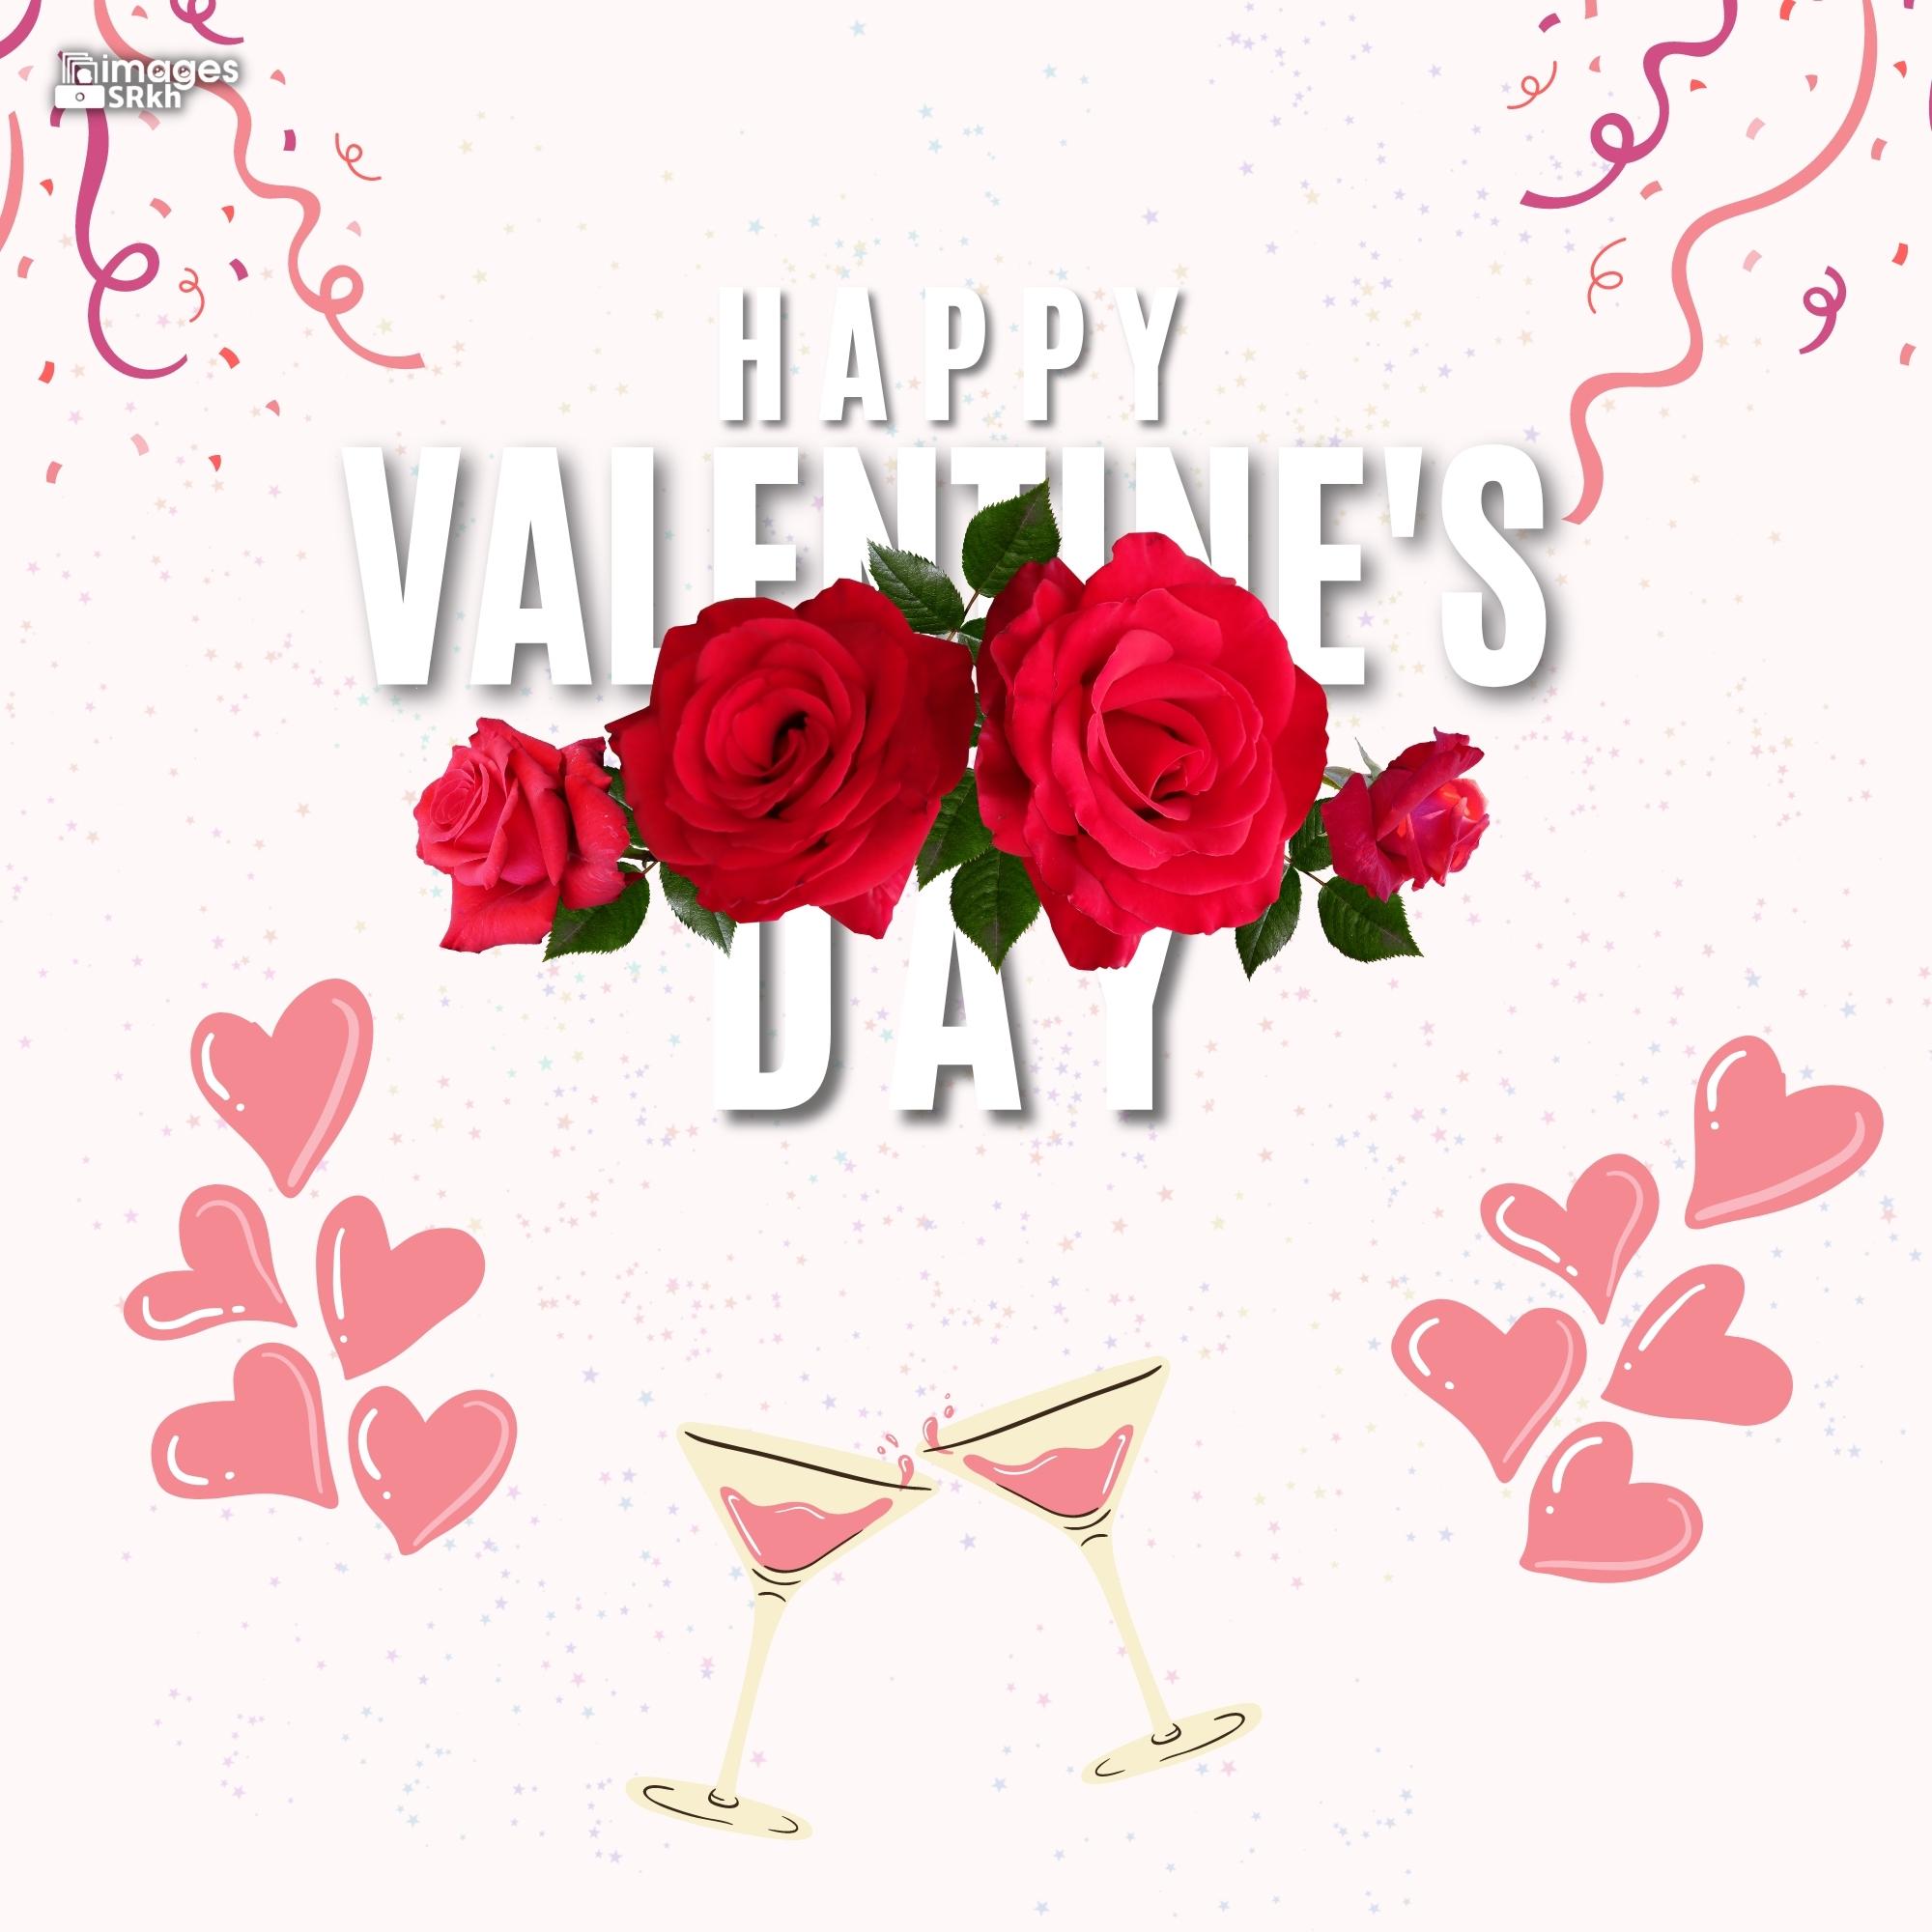 Happy Valentines Day | 537 | PREMIUM IMAGES | Wishes for Love